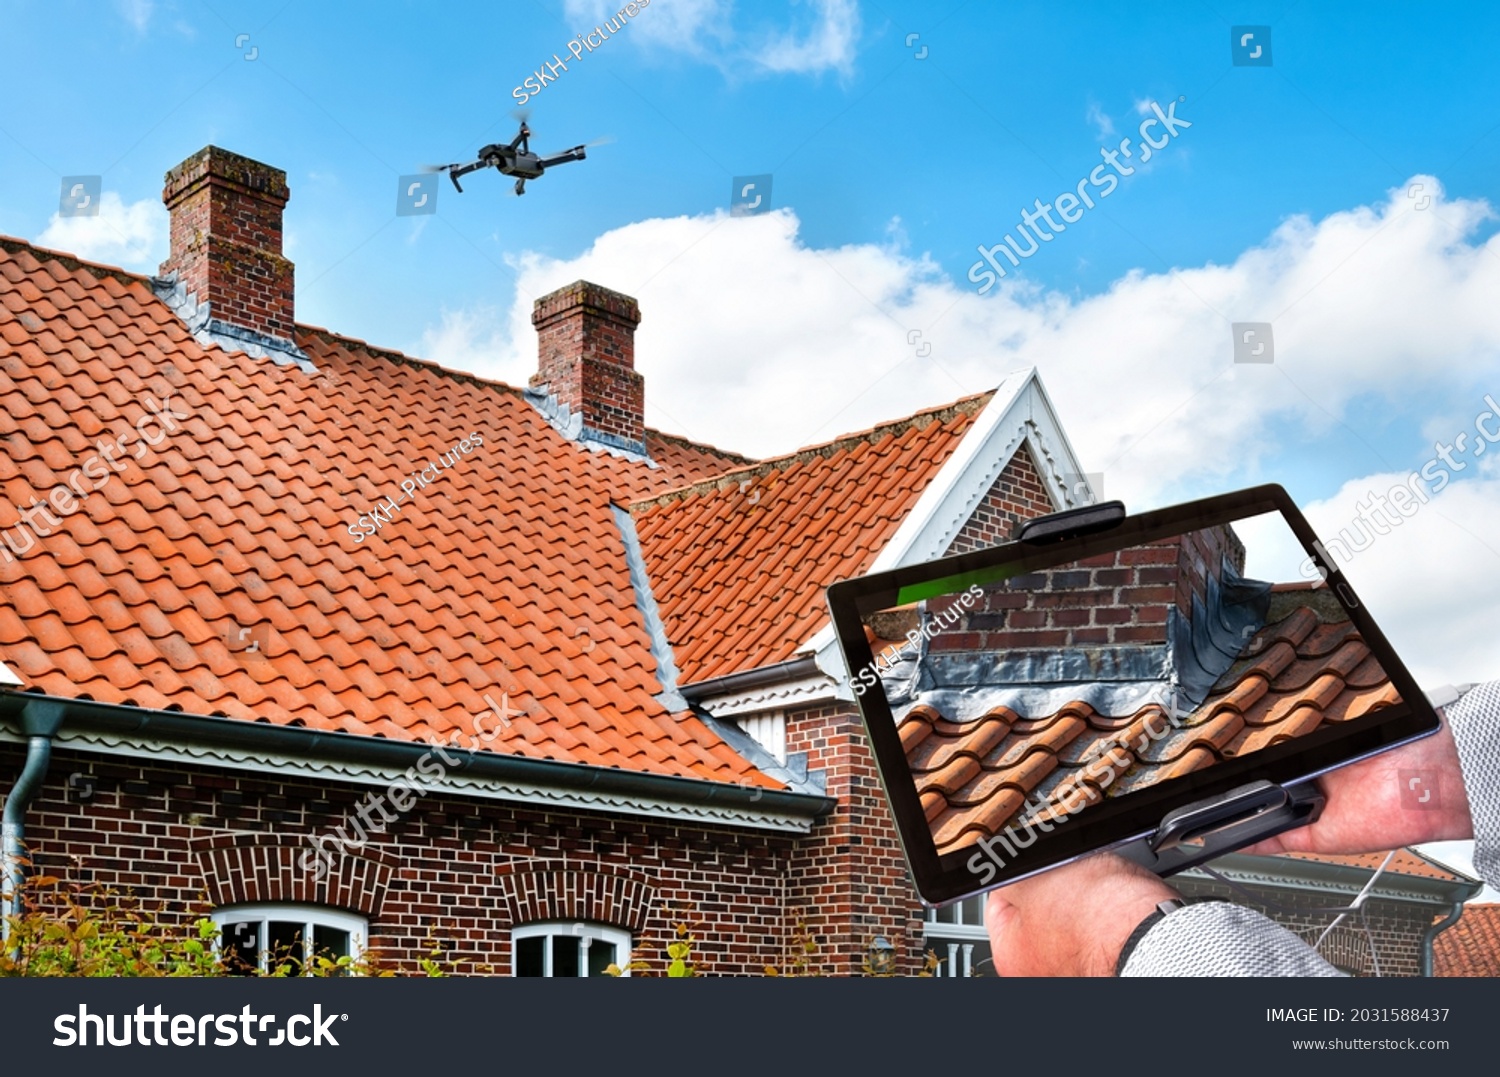 Drone in the air inspecting the roof over the house. Close-up of drone and roof. #2031588437